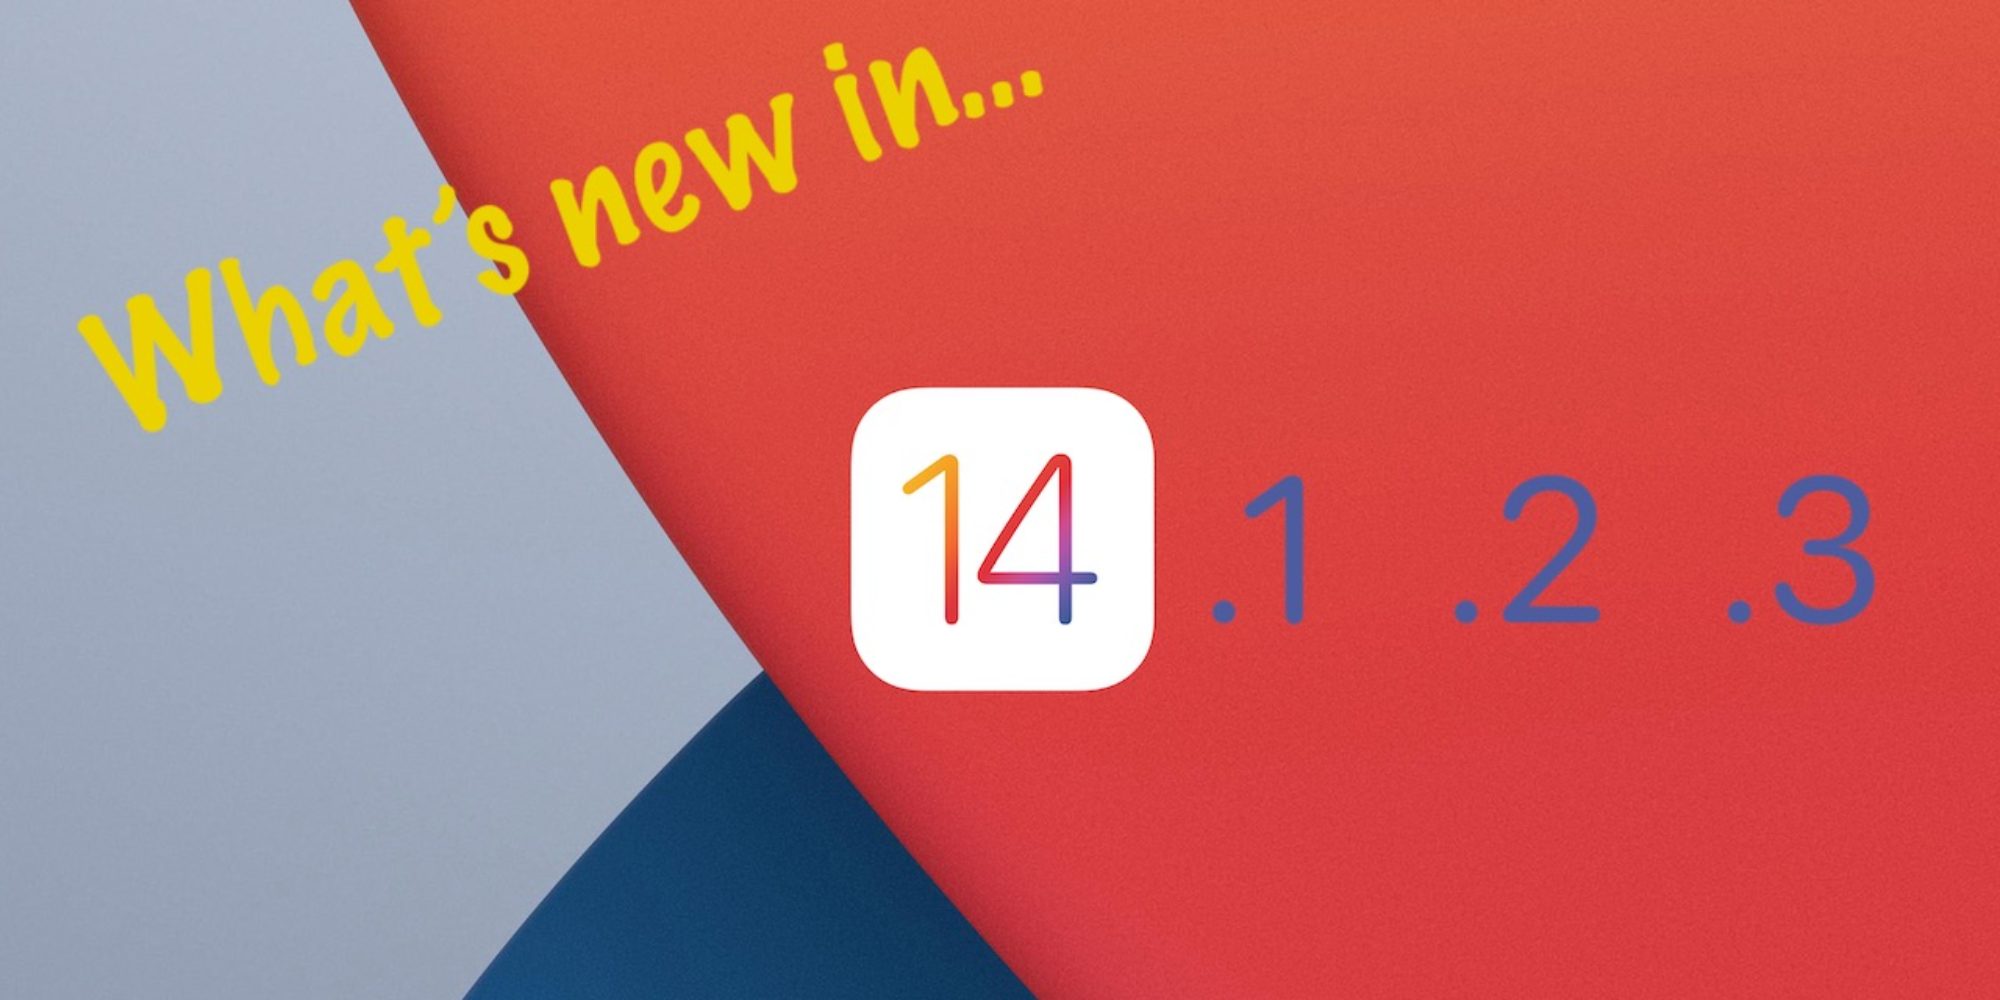 New Features You May Have Missed in the iOS 14.1, 14.2, and 14.3 Updates